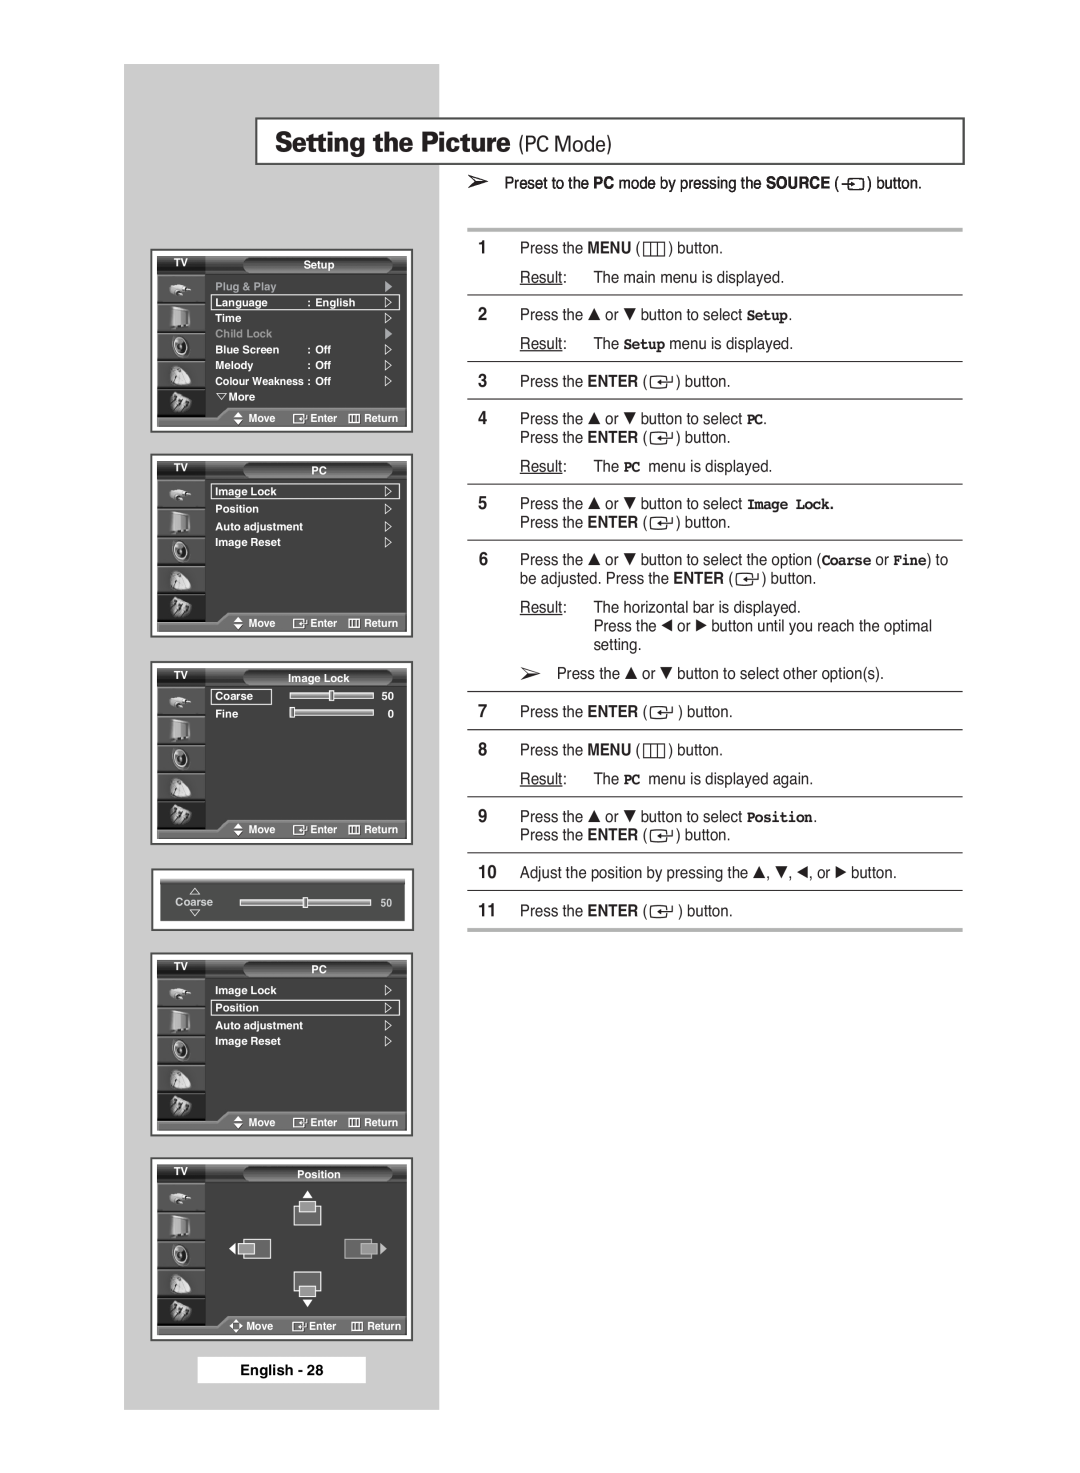 Samsung PS-42S5S manual Setting the Picture PC Mode, Coarse 